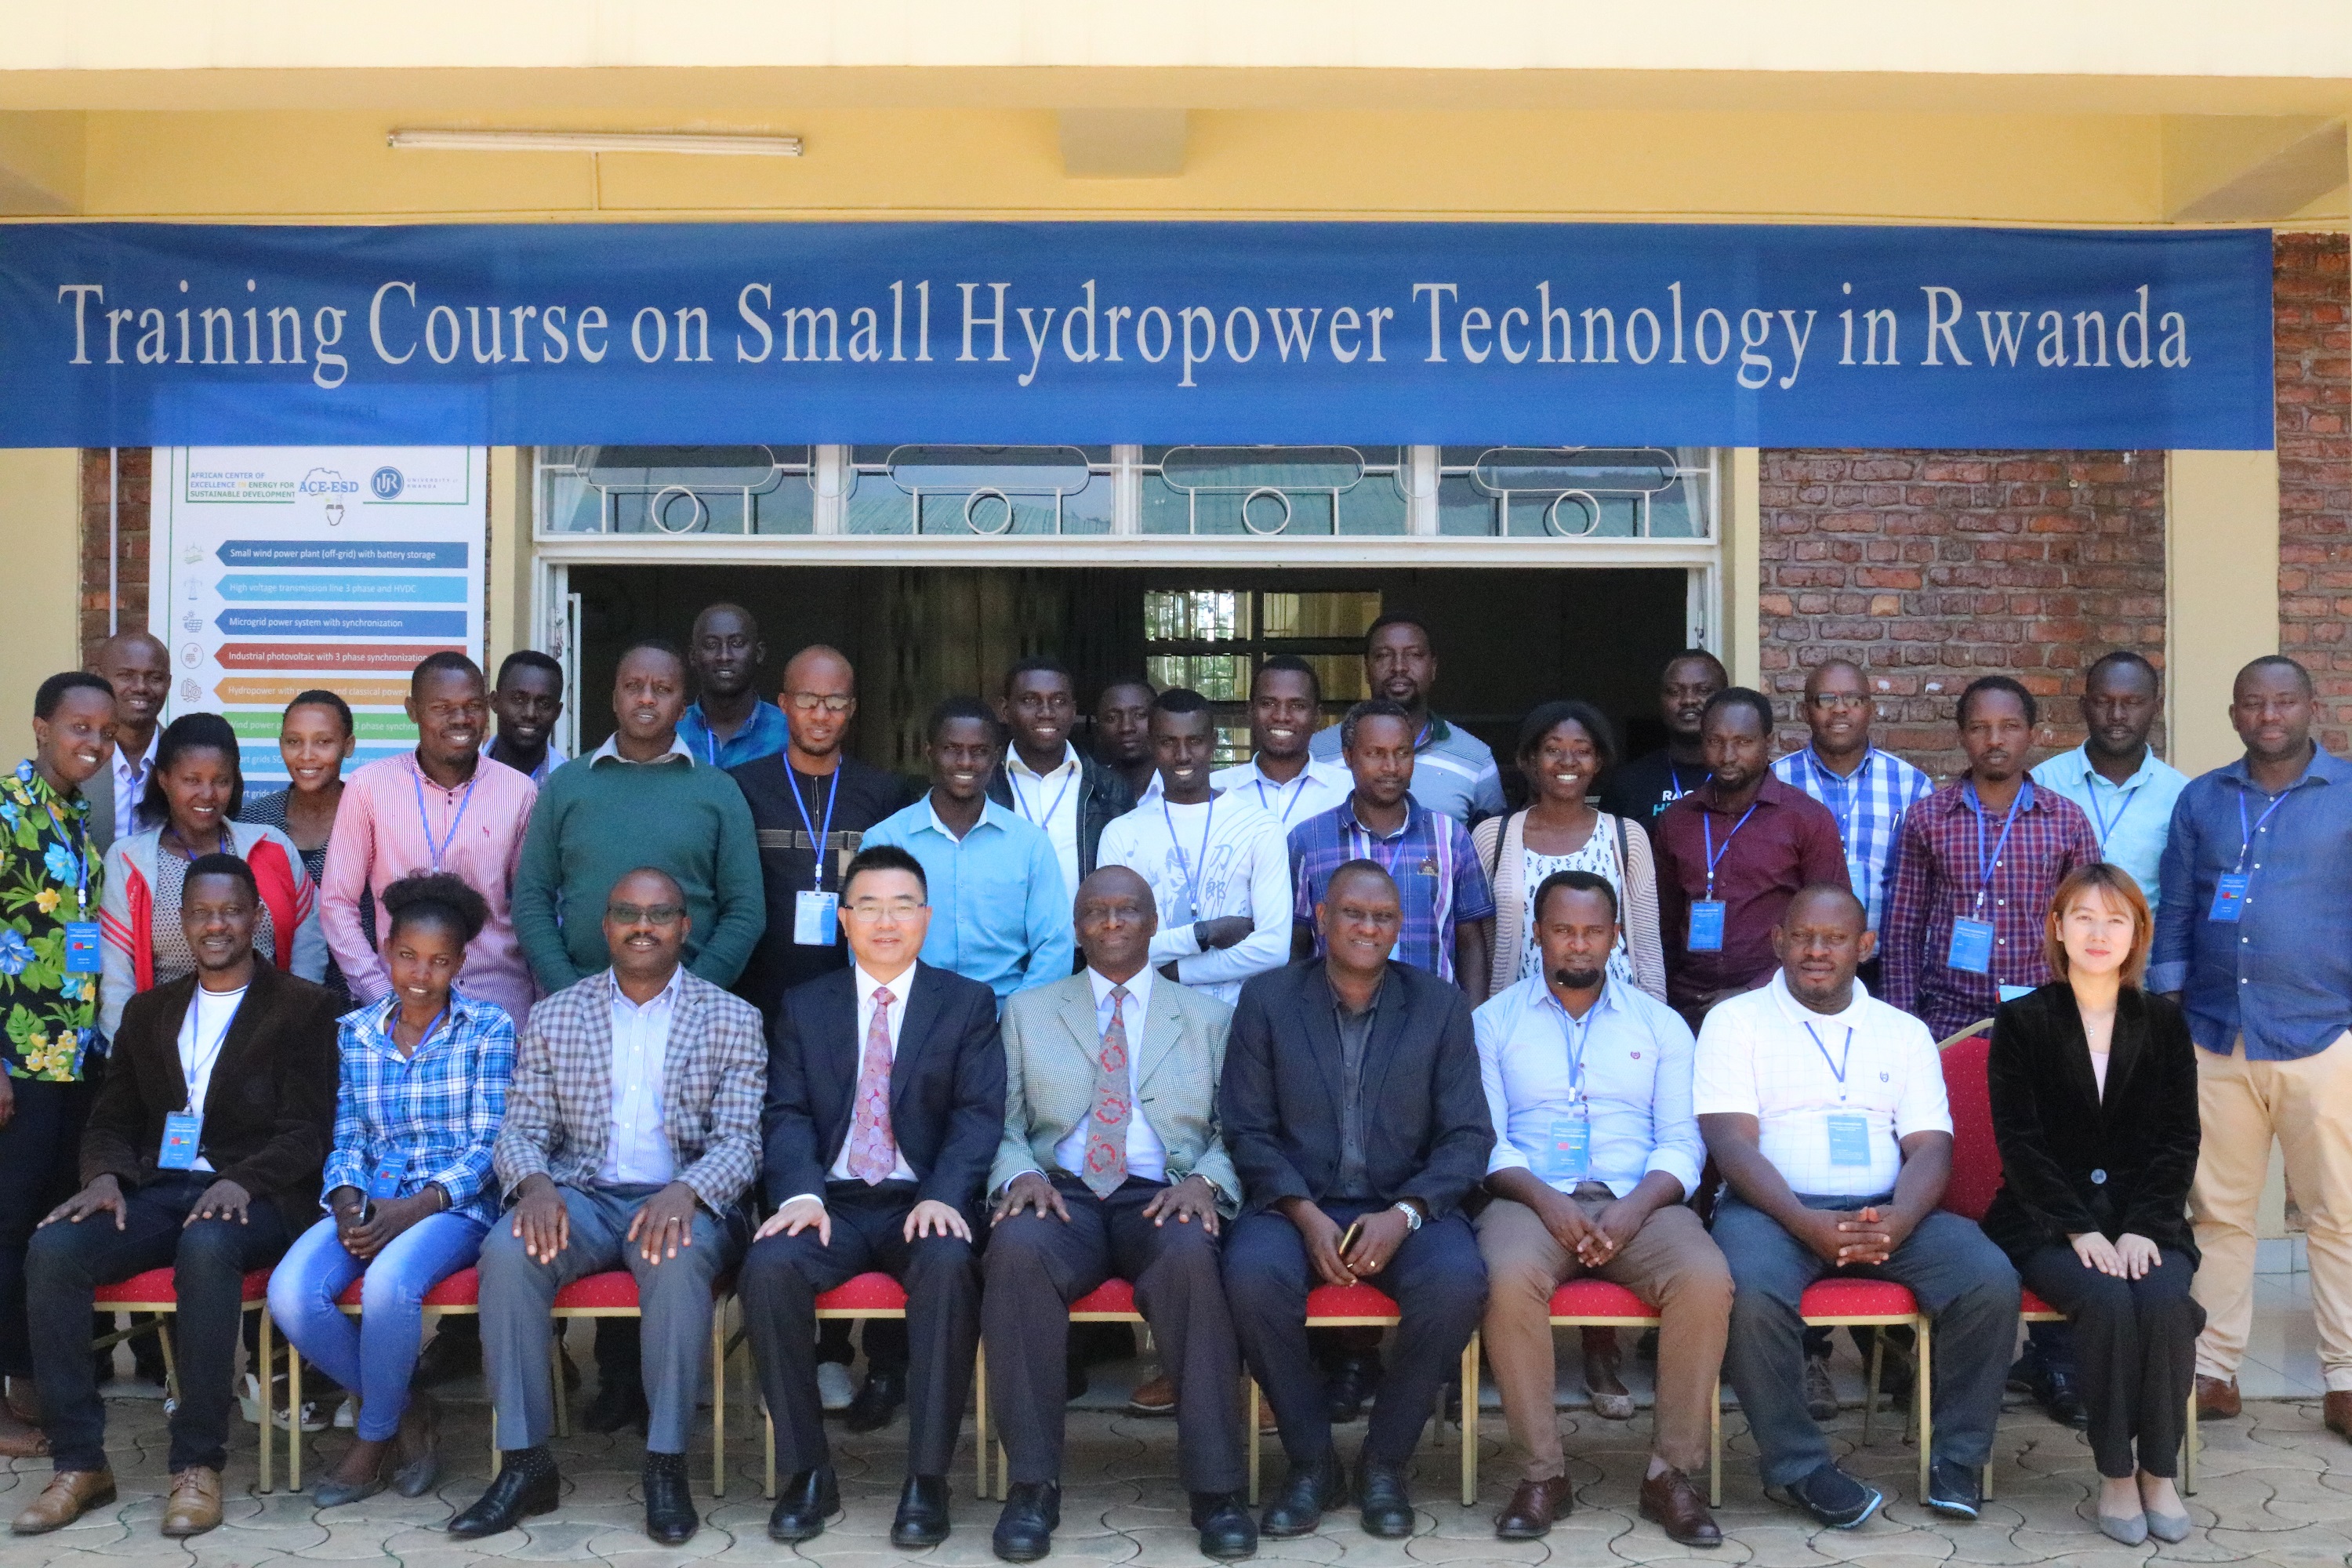 Experts in Energy from Rwanda trained in Small Hydropower Technologies 